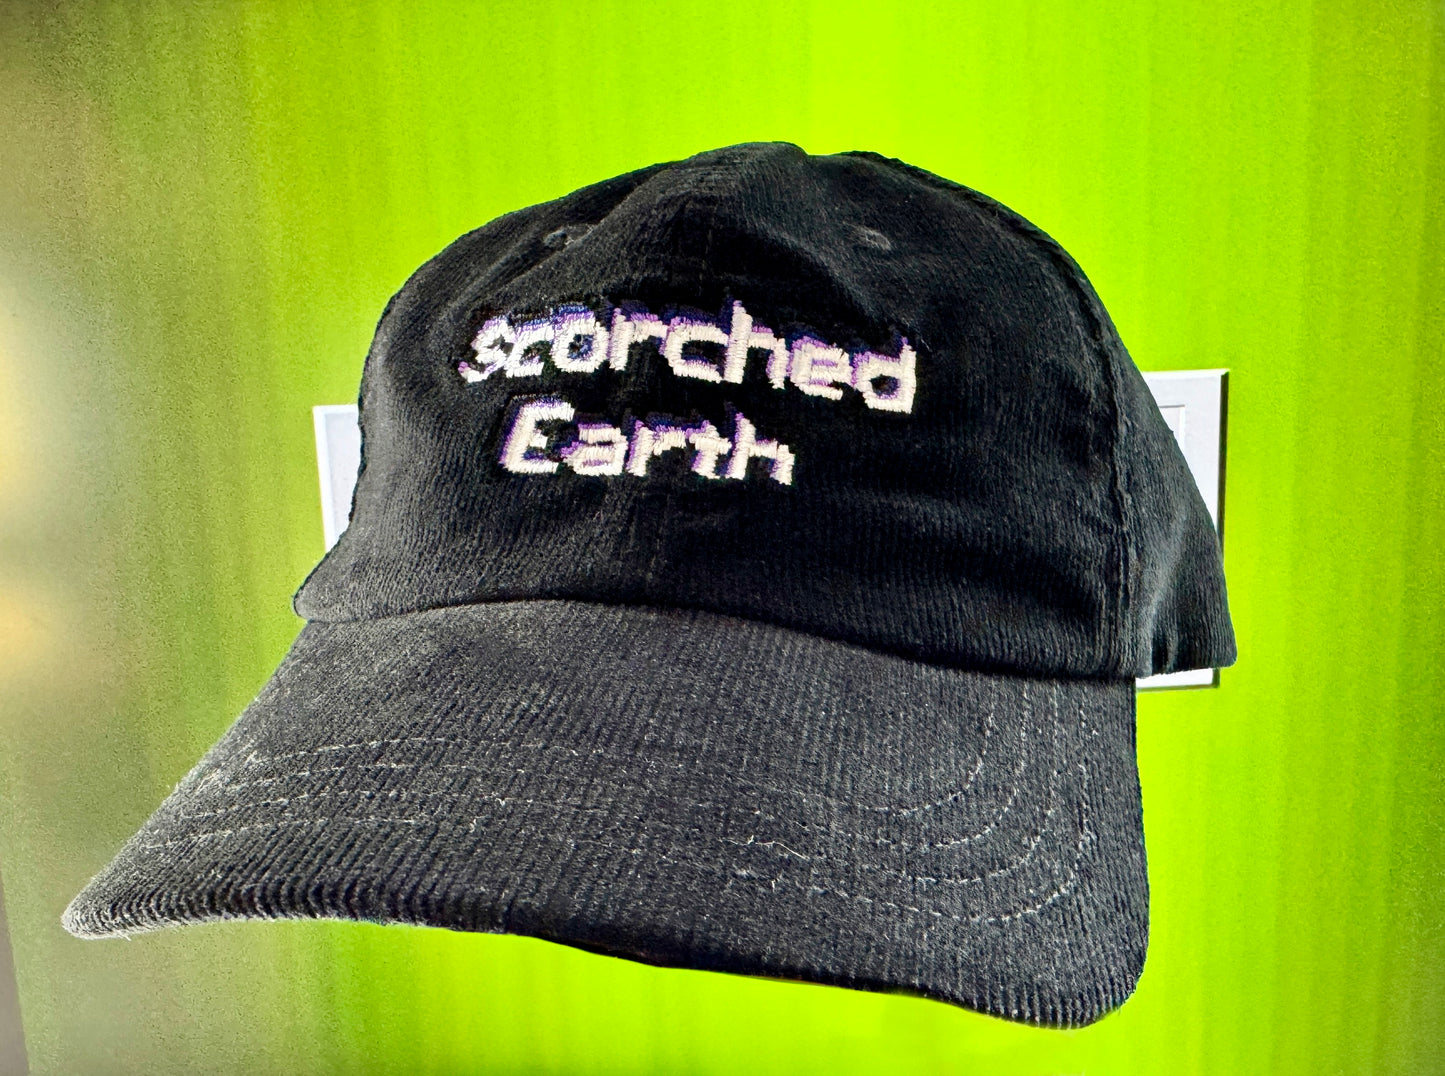 Scorched Earth Hat